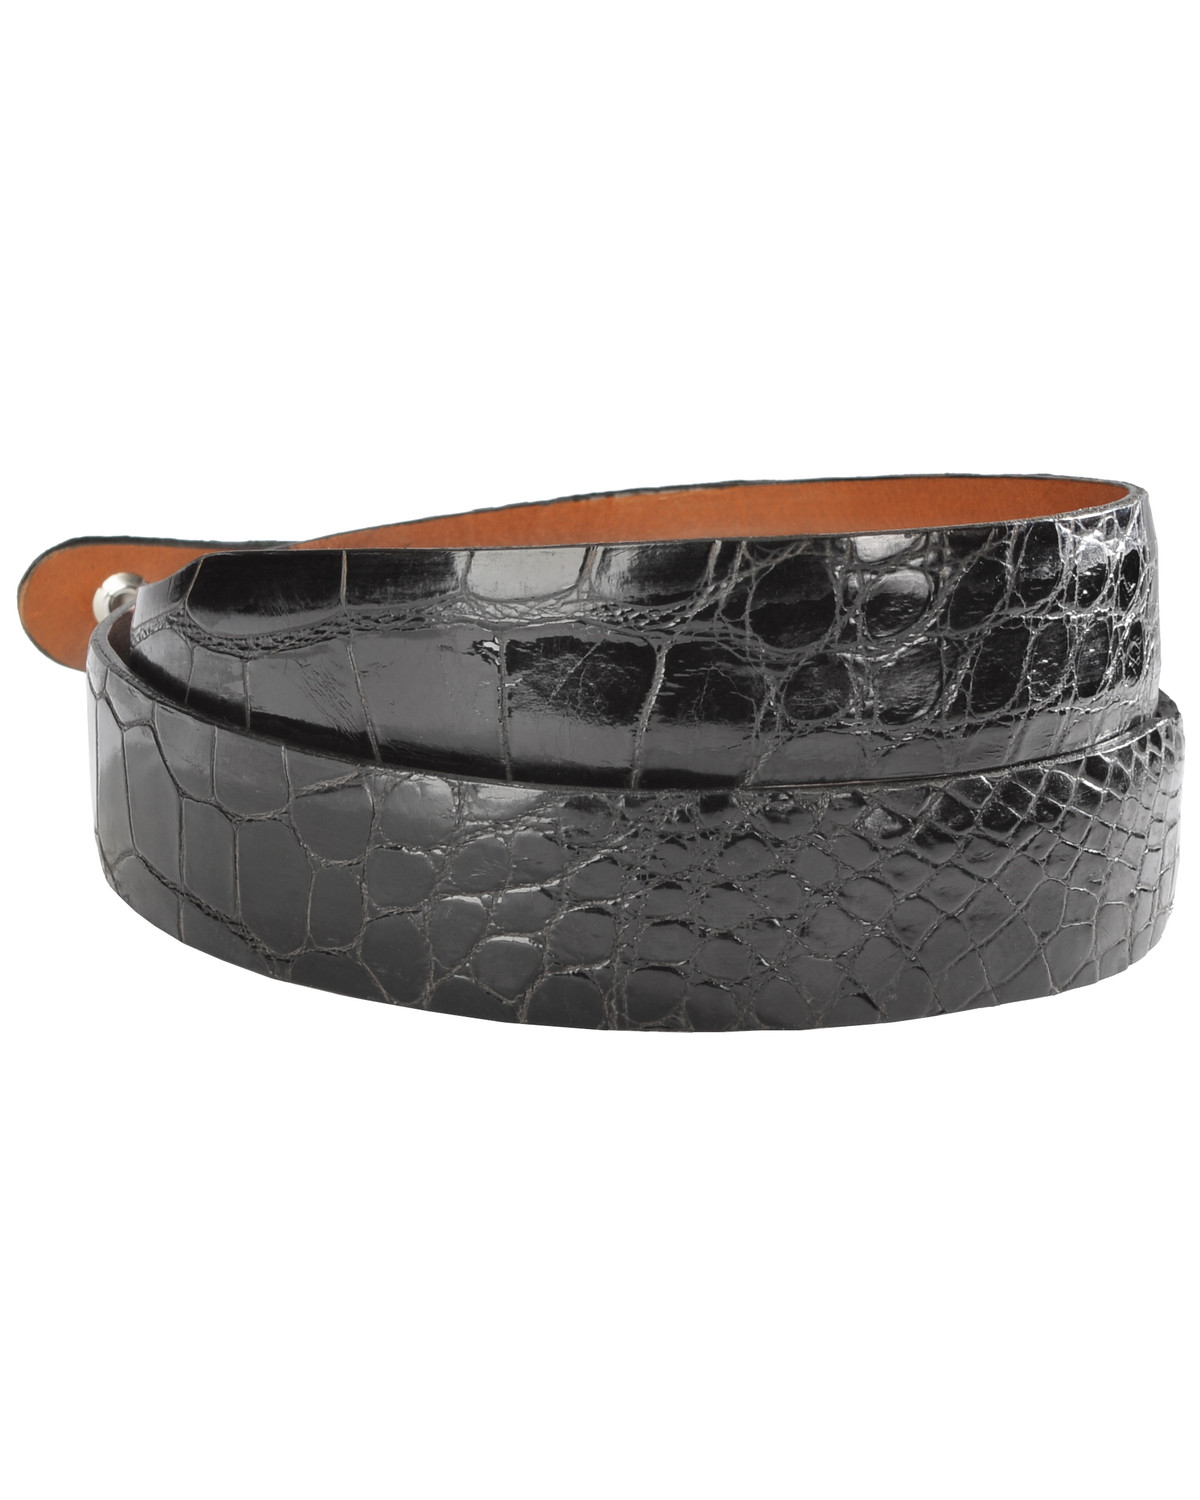 Lucchese Men's Black Alligator Leather Belt - Country Outfitter